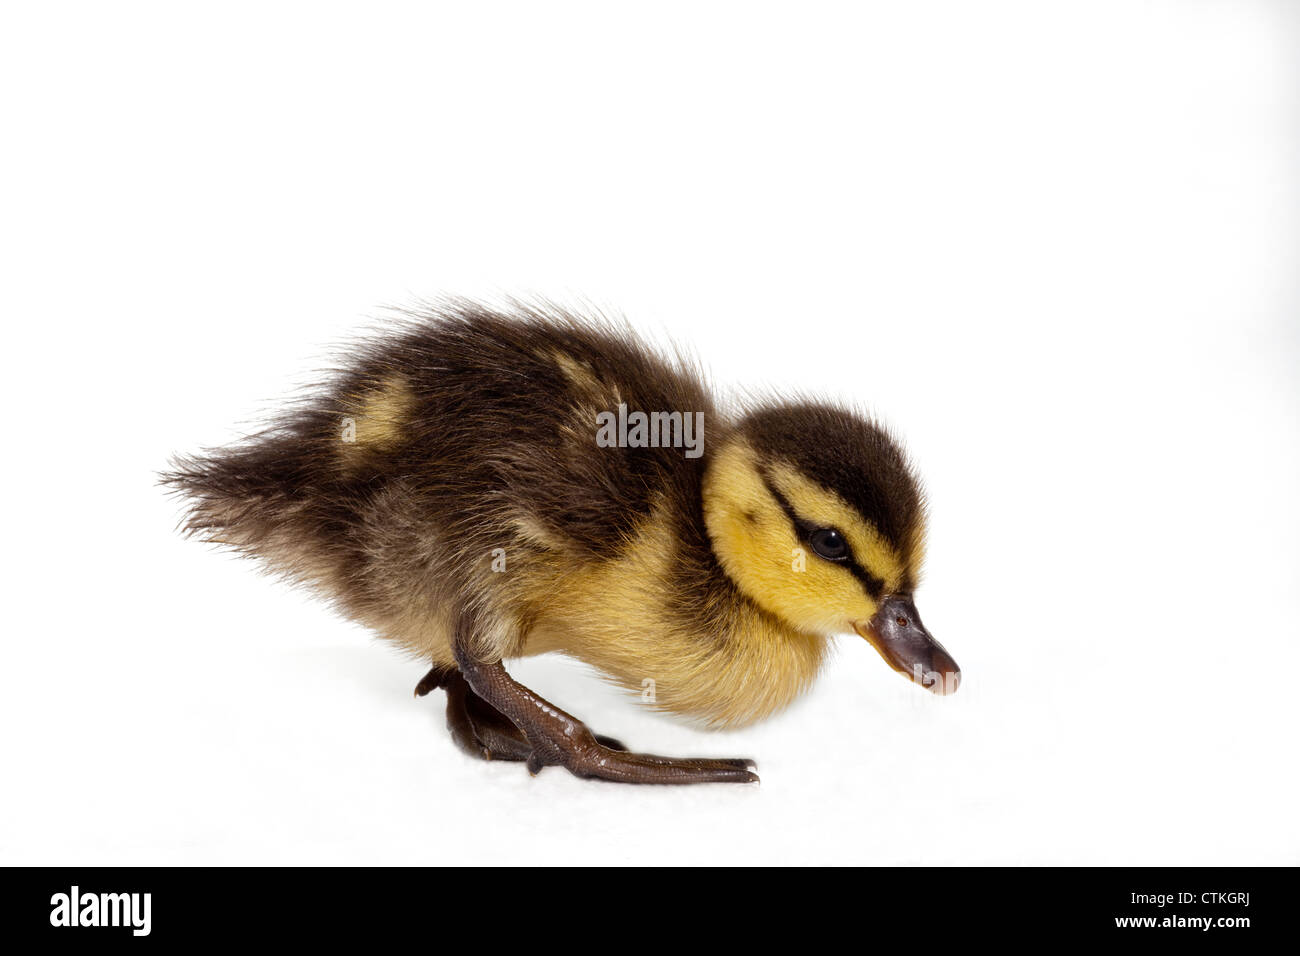 Mallard Duckling (Anas platyrhynchos). Day old. Searching for food items for the first time after hatching. Stock Photo